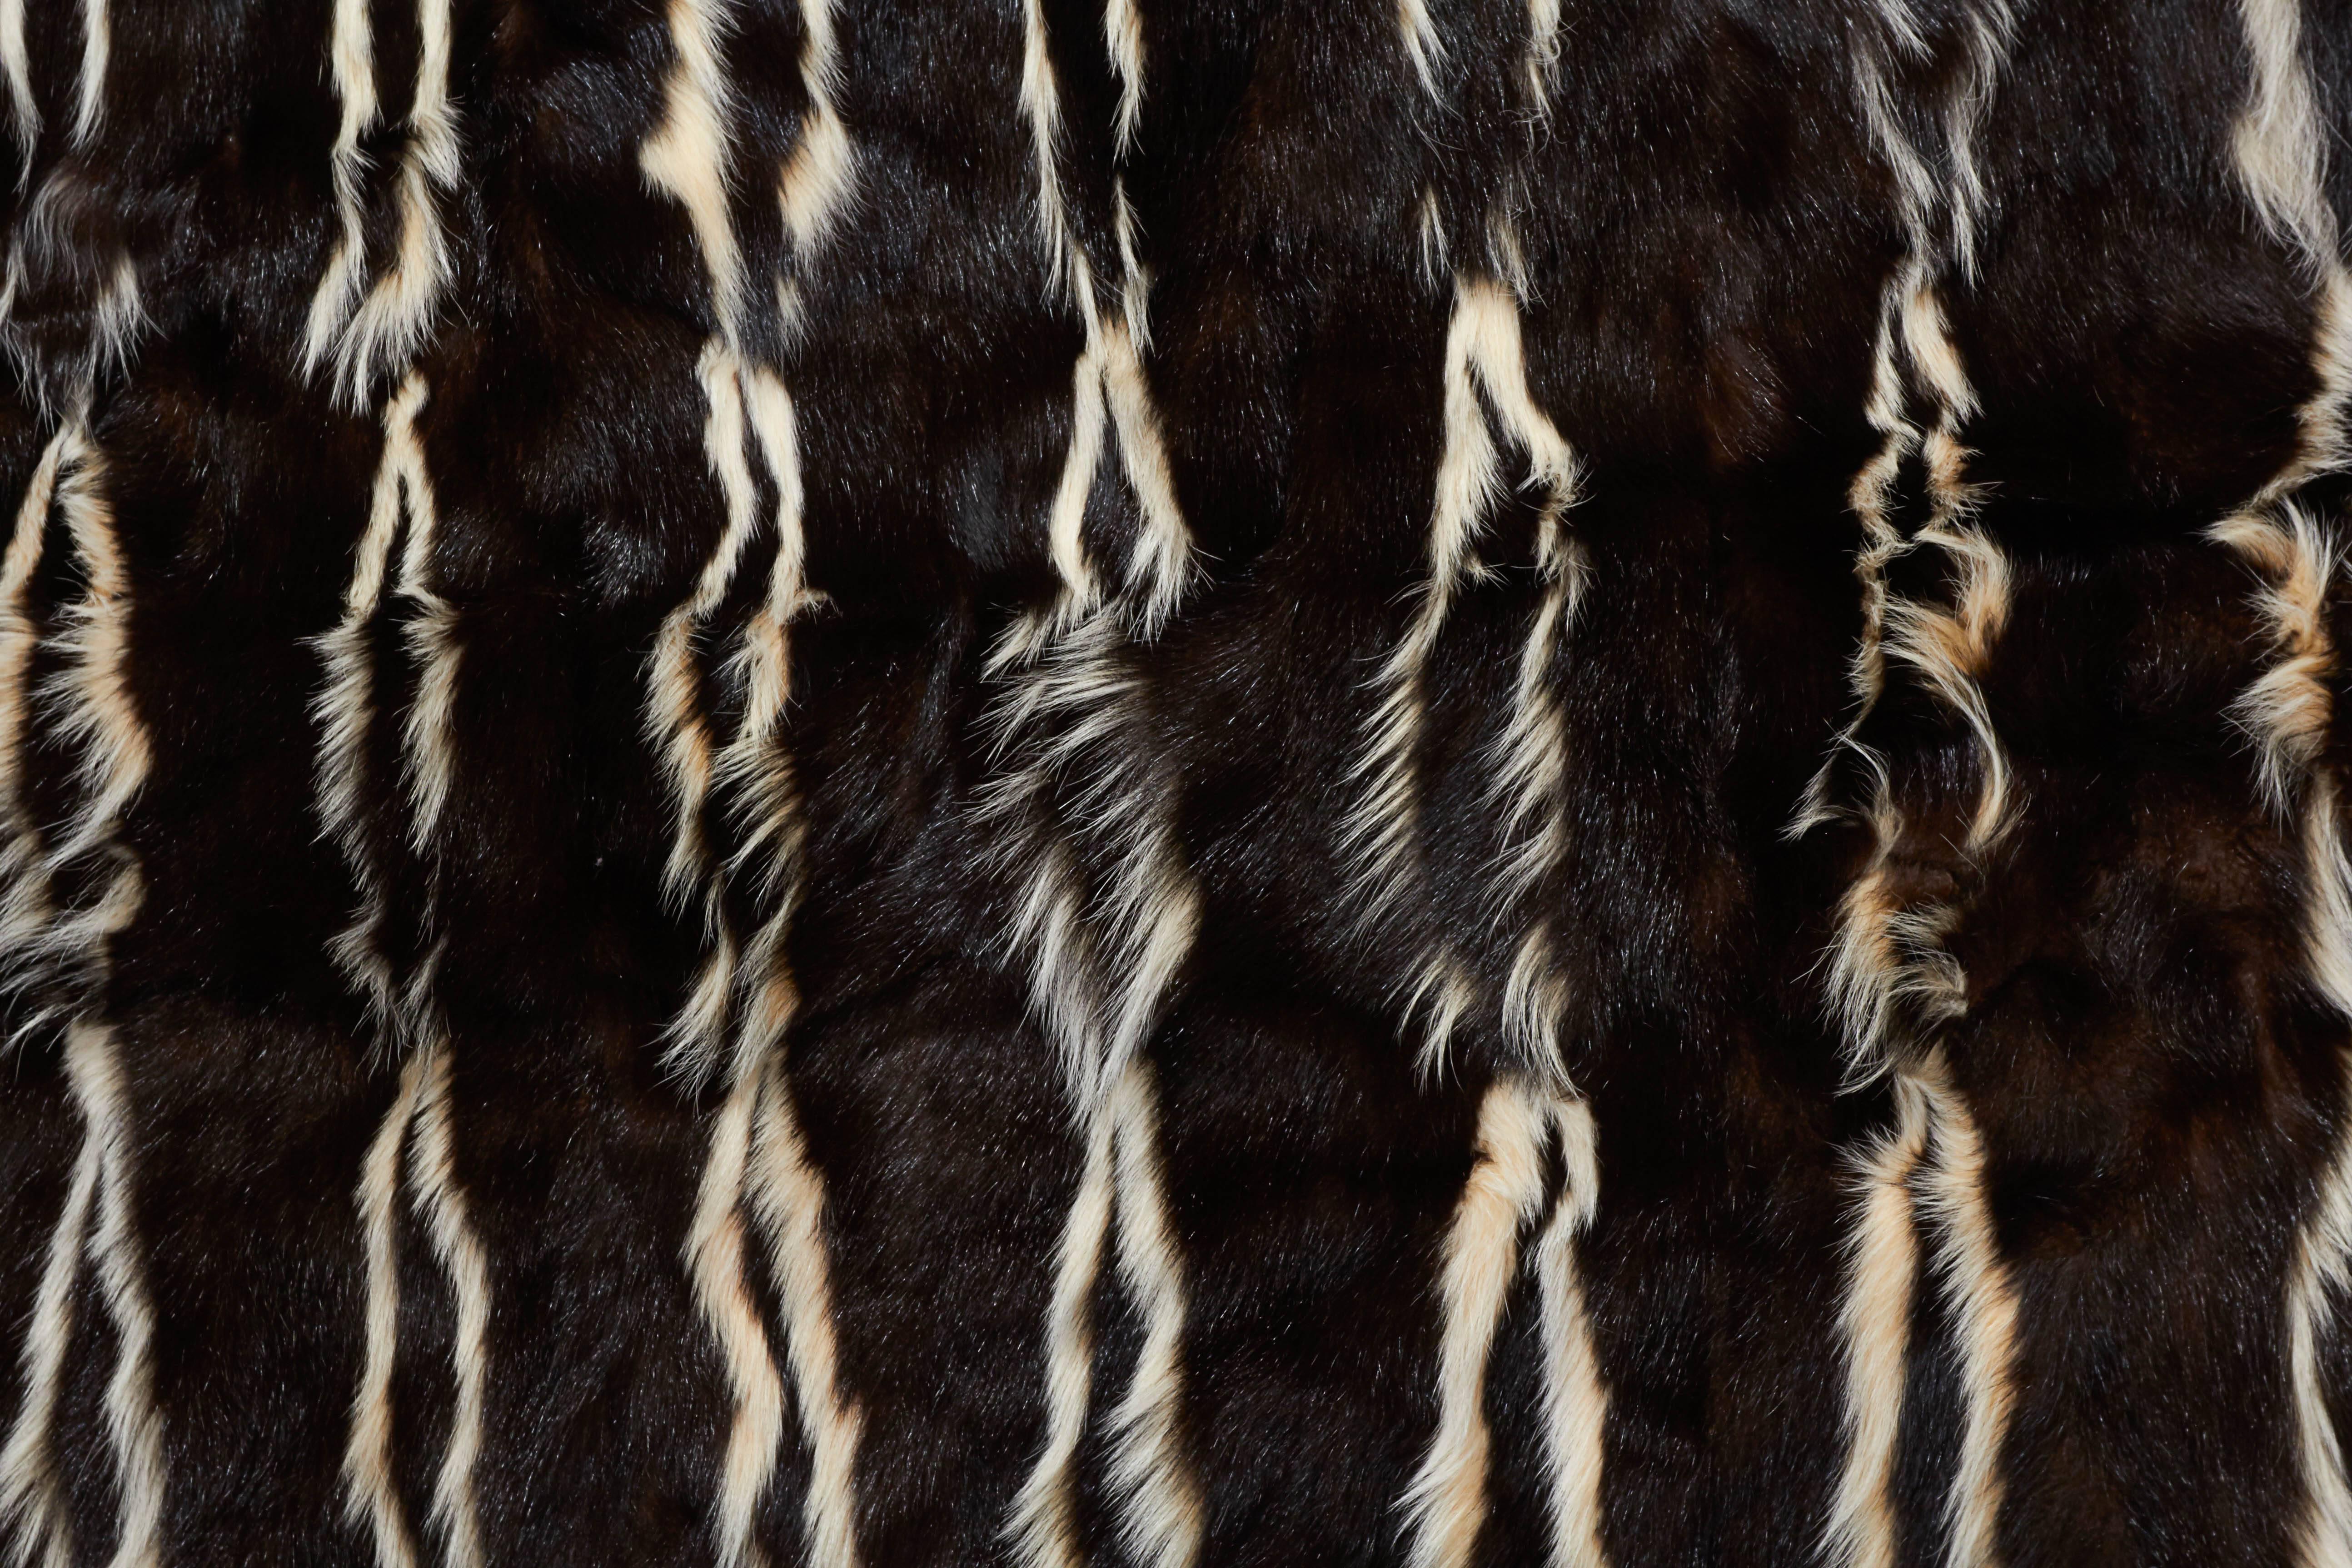 This striking authentic fur is made of skunk fur and can we used as an area rug or throw/blanket.